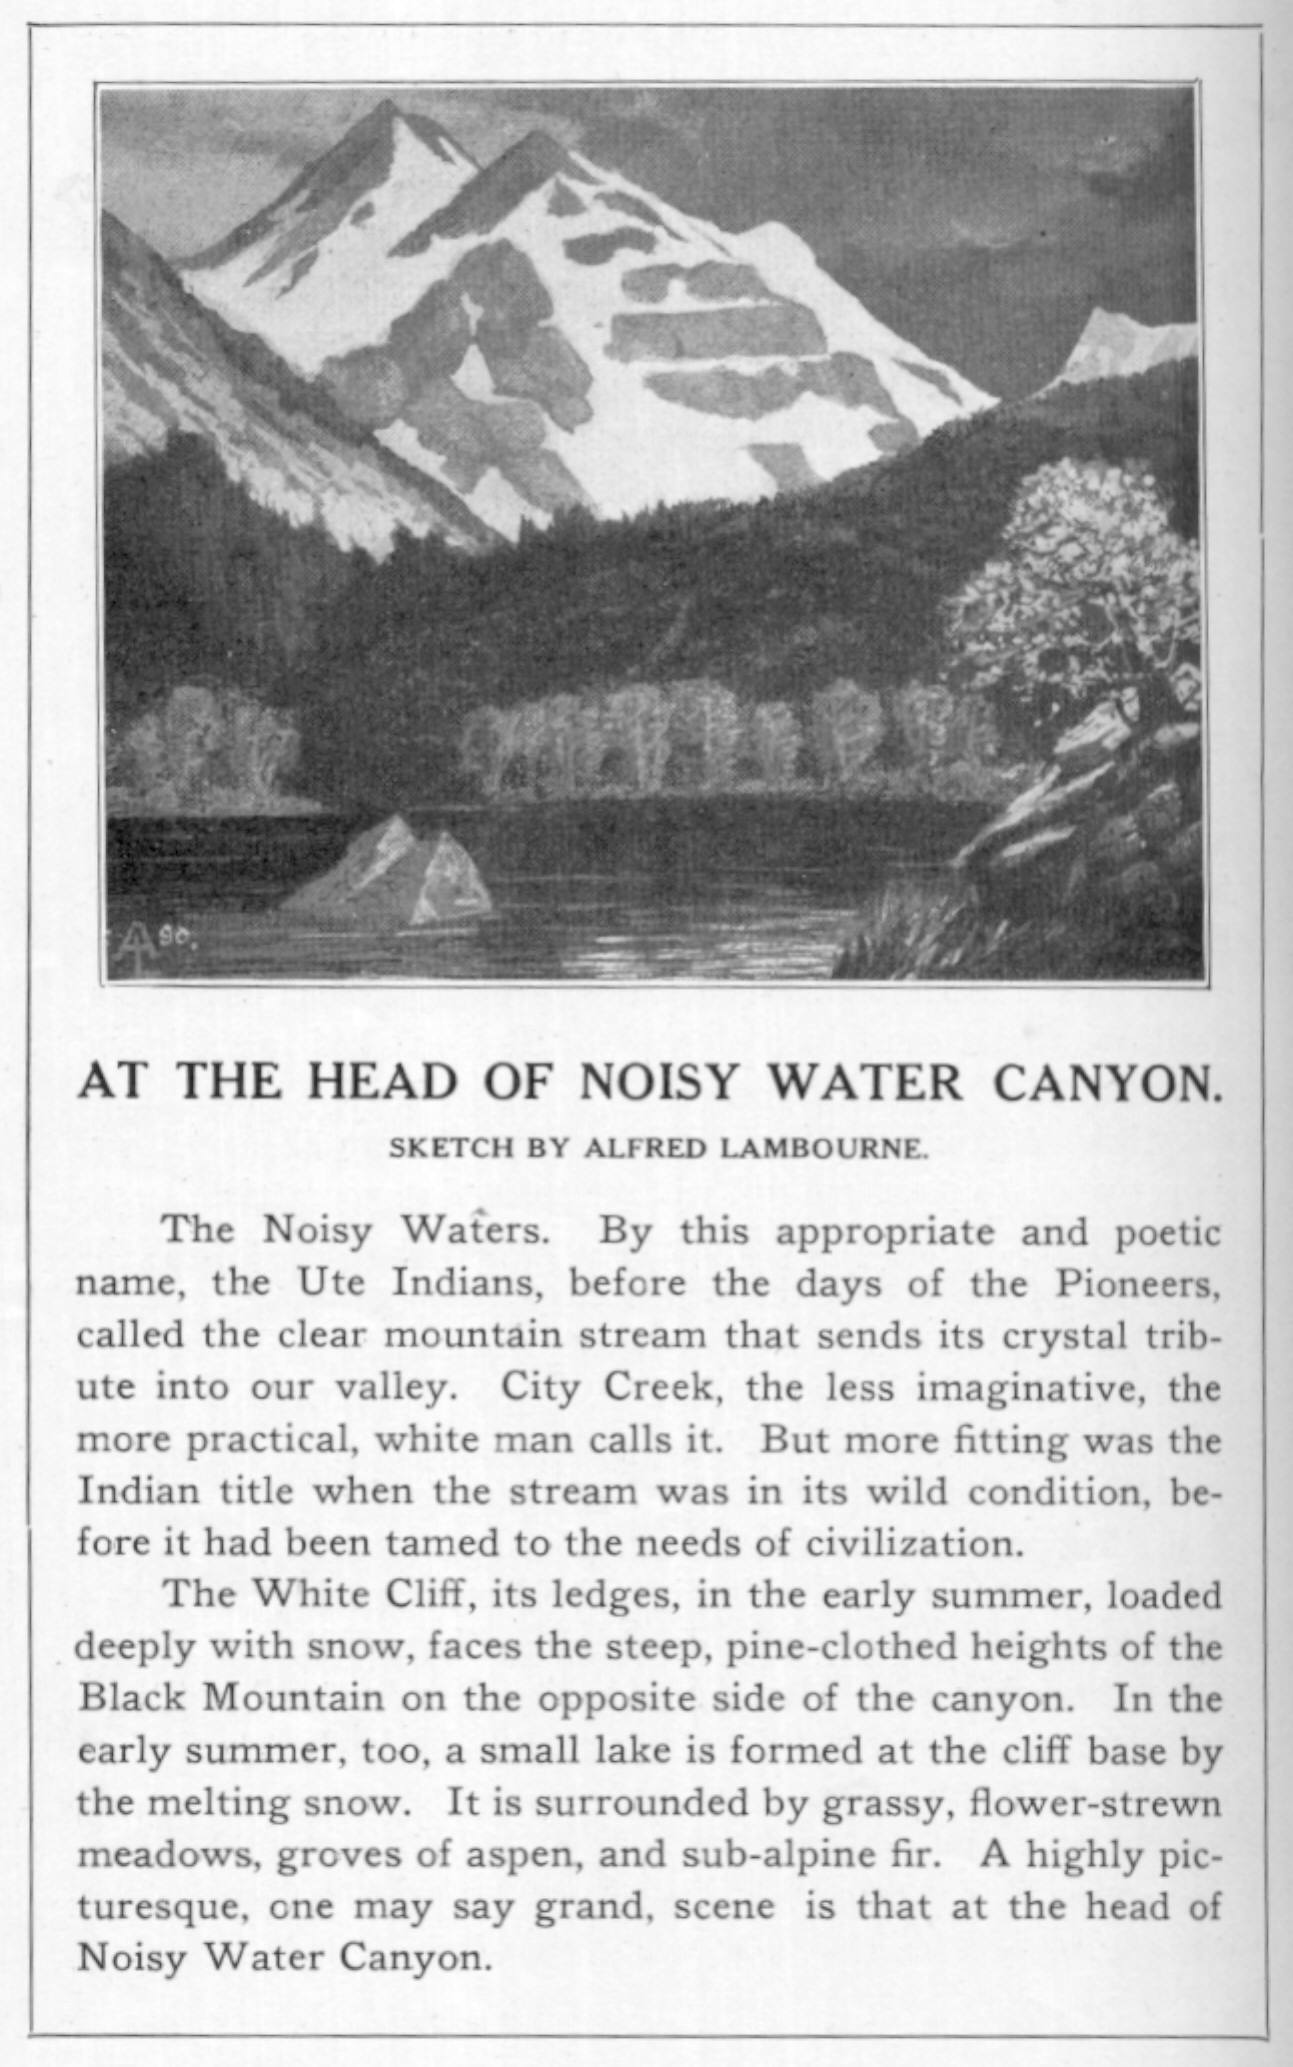 At the Head of Noisy Water Canyon - by Alfred Lambourne